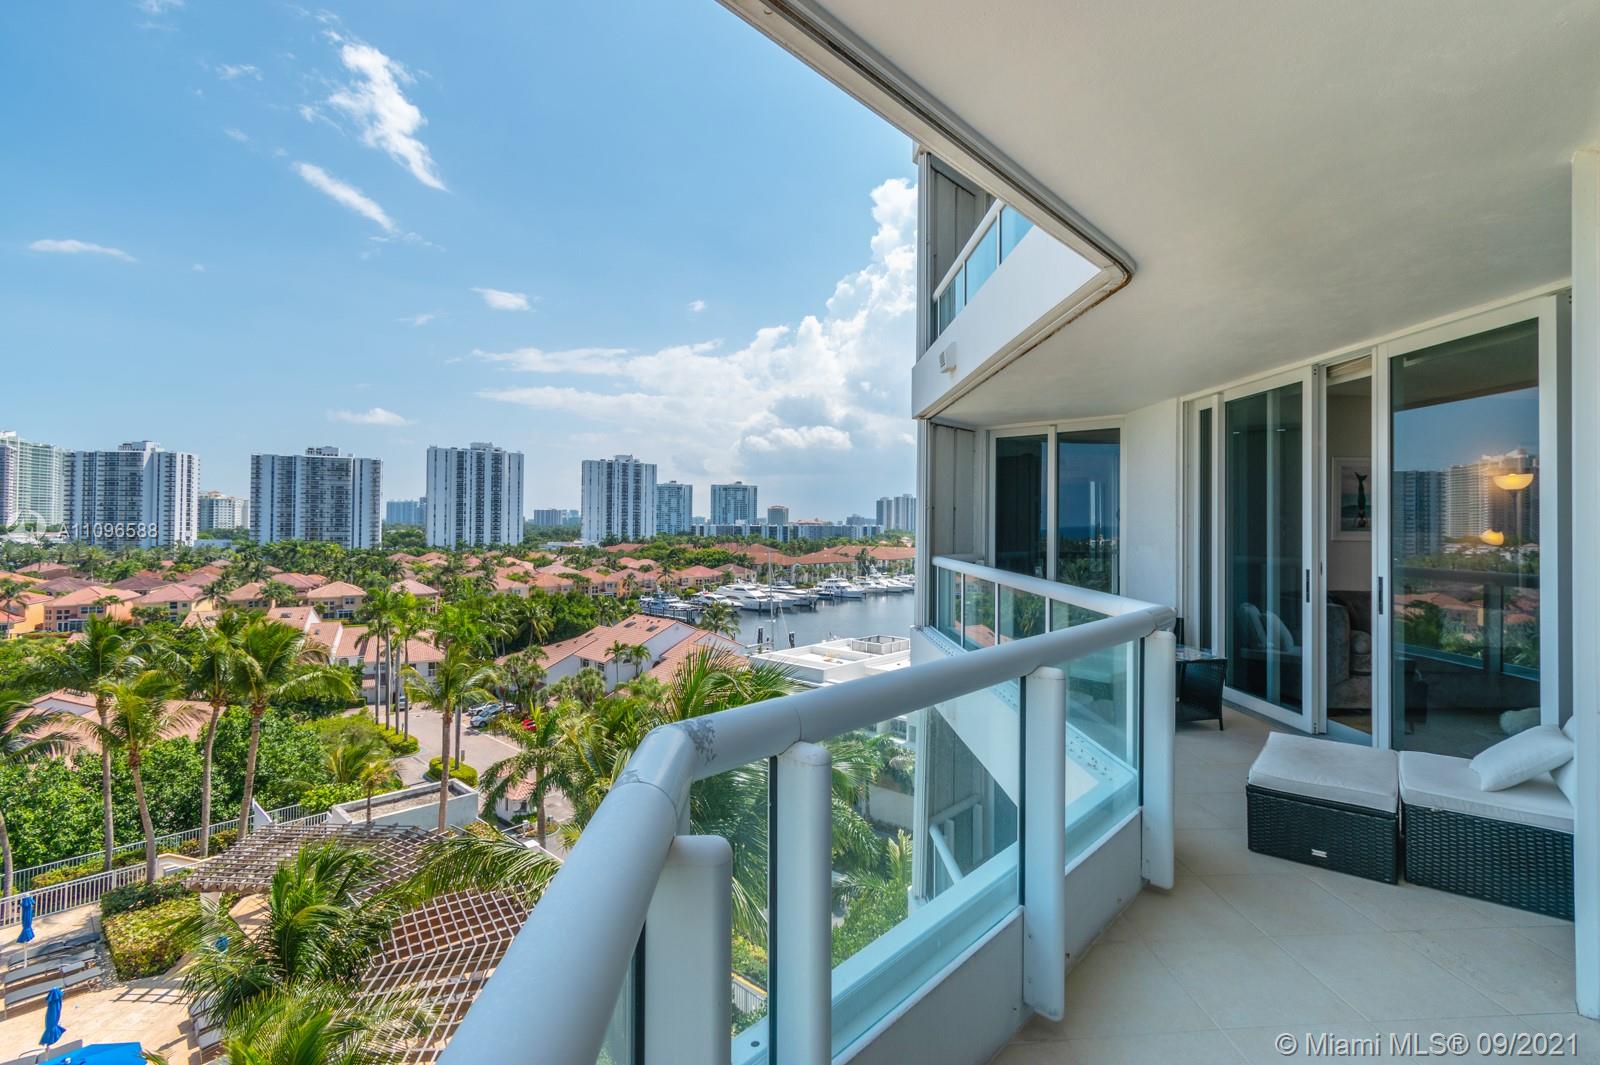 Photo 13 of South Tower At The Point Apt 909 in Aventura - MLS A11096588